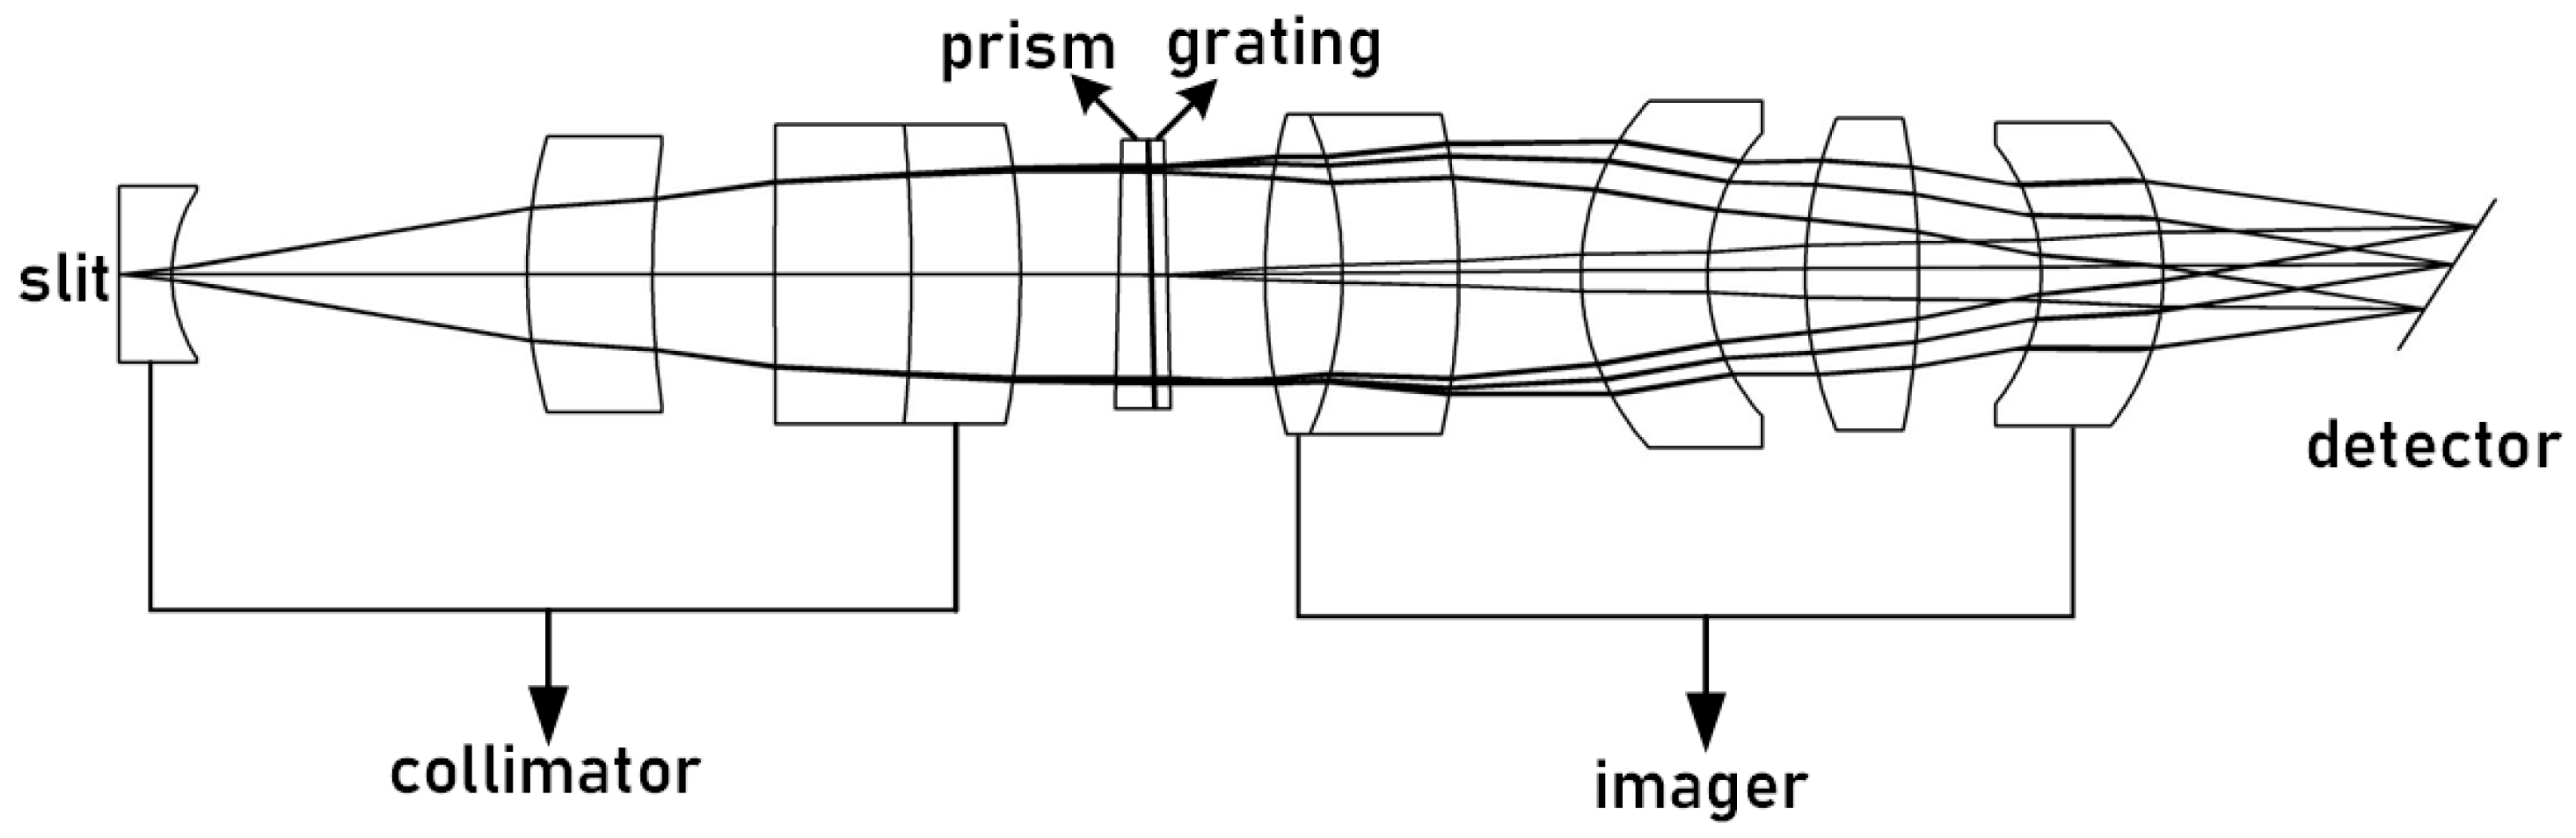 A simple spectroscope: the grating and slit are evidenced